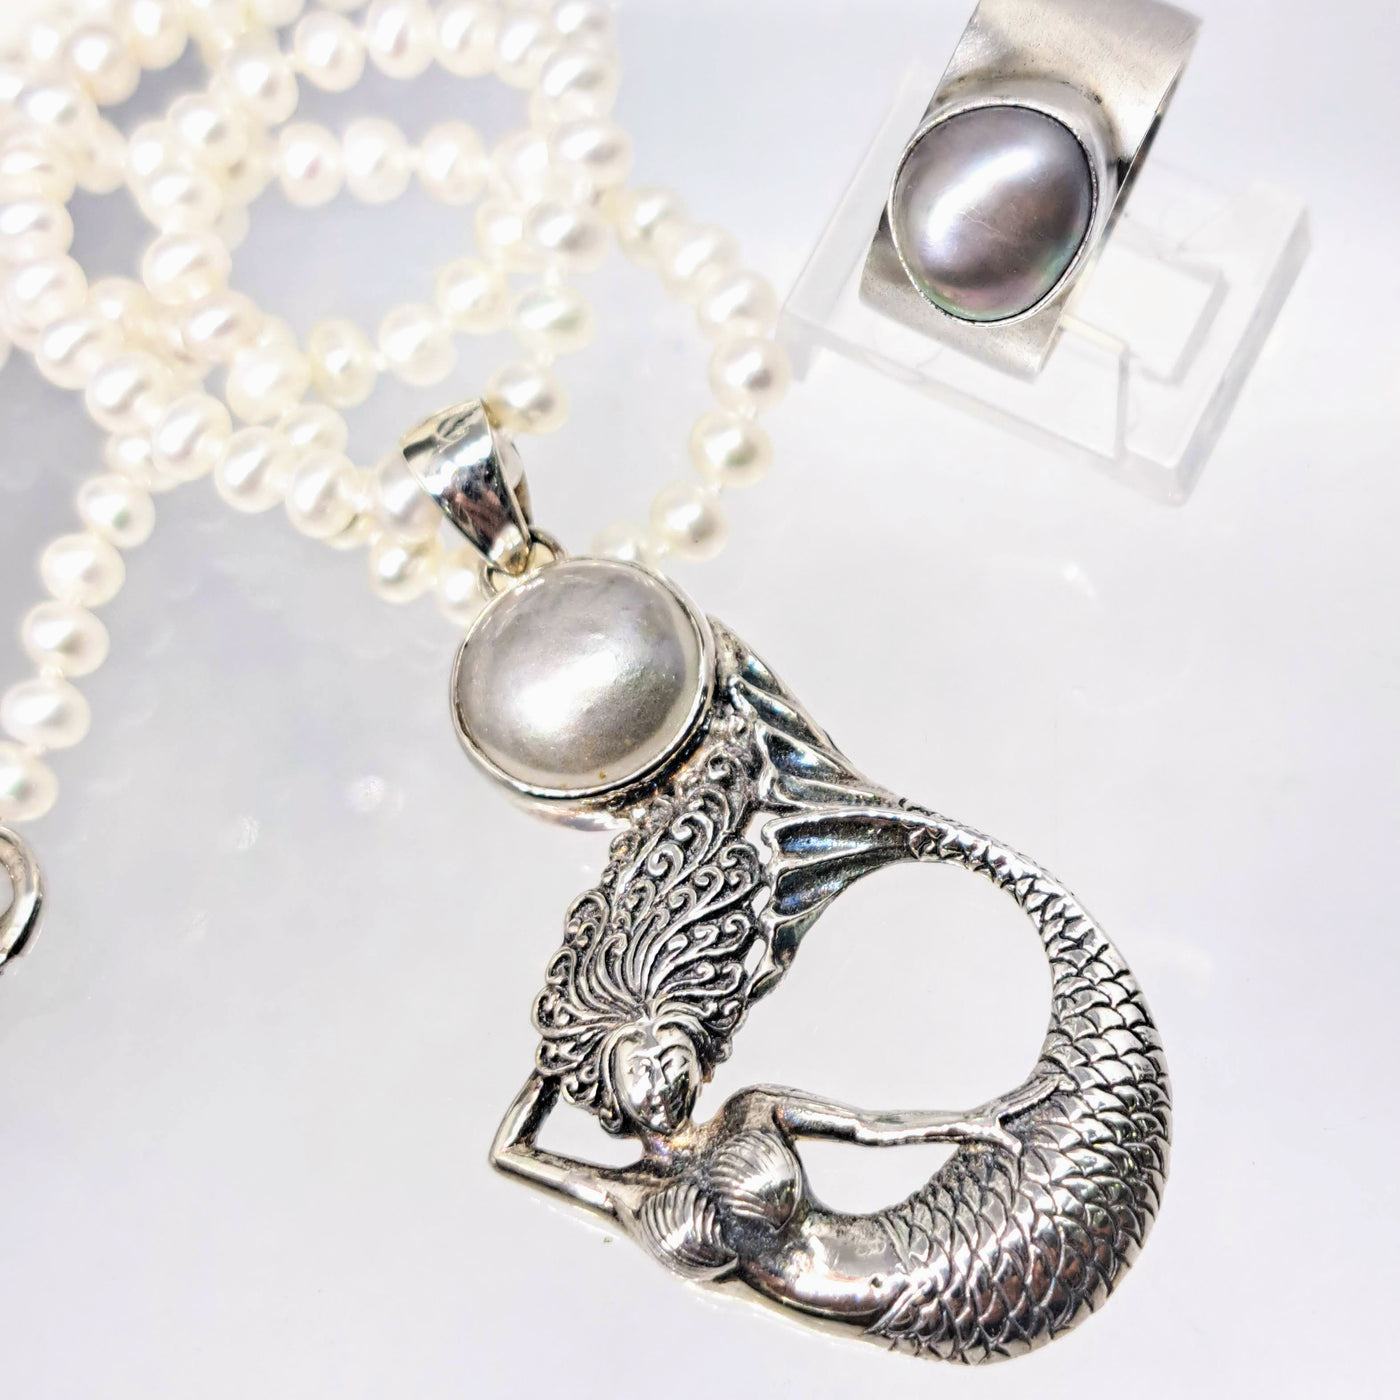 "Mabe' I'm A Mermaid!" 2" Pendant 18" Necklace -Pearls, Sterling